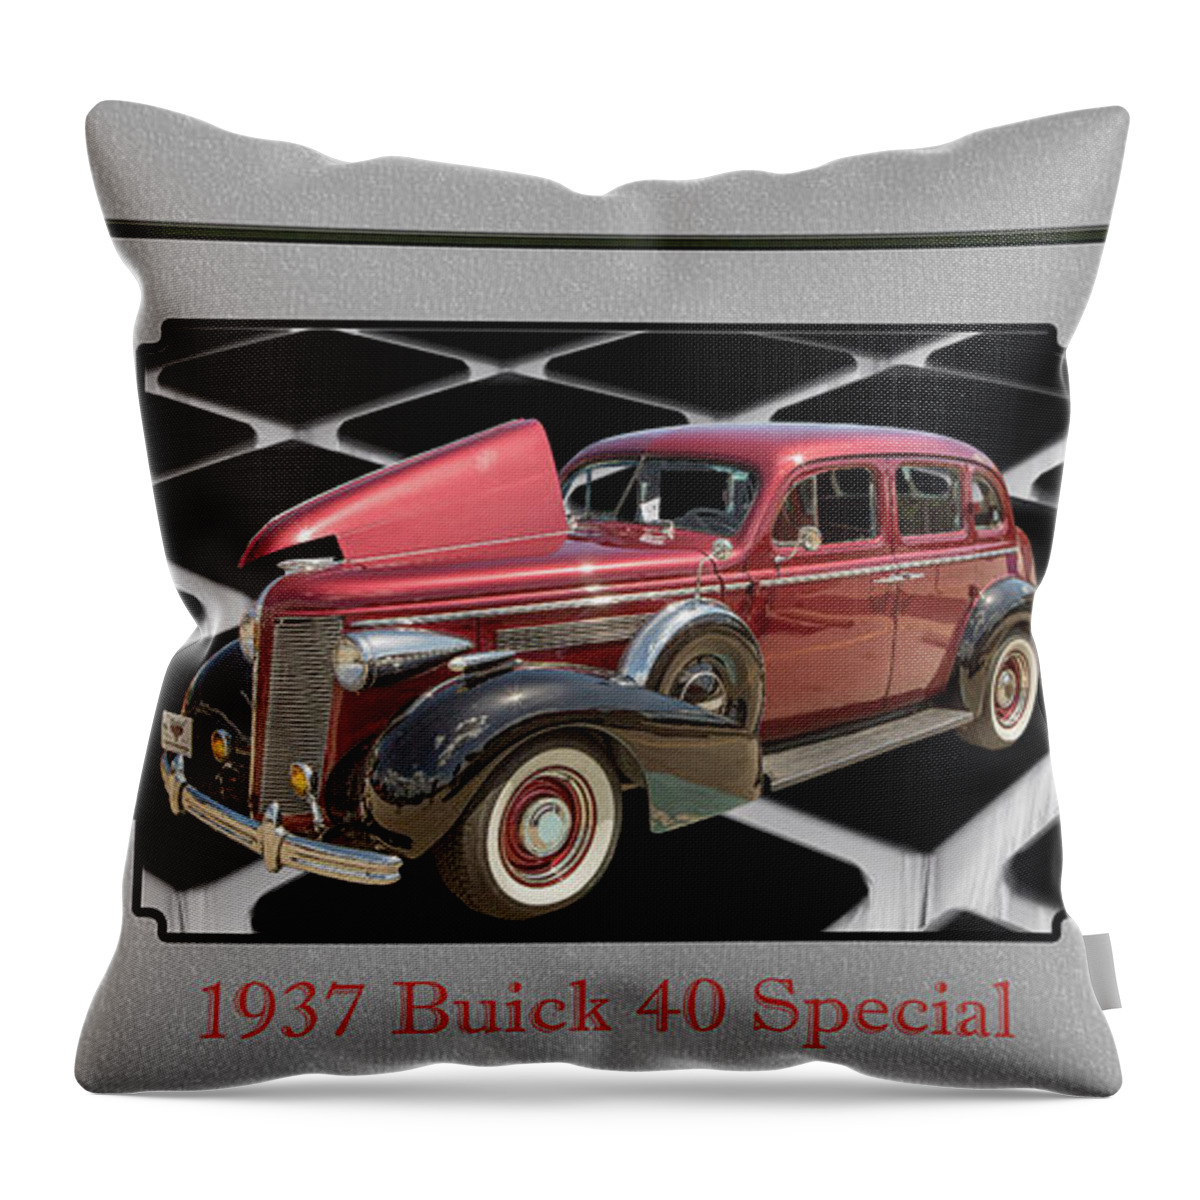 1937 Buick 40 Special Throw Pillow featuring the photograph 1937 Buick 40 Special 5541.28 by M K Miller